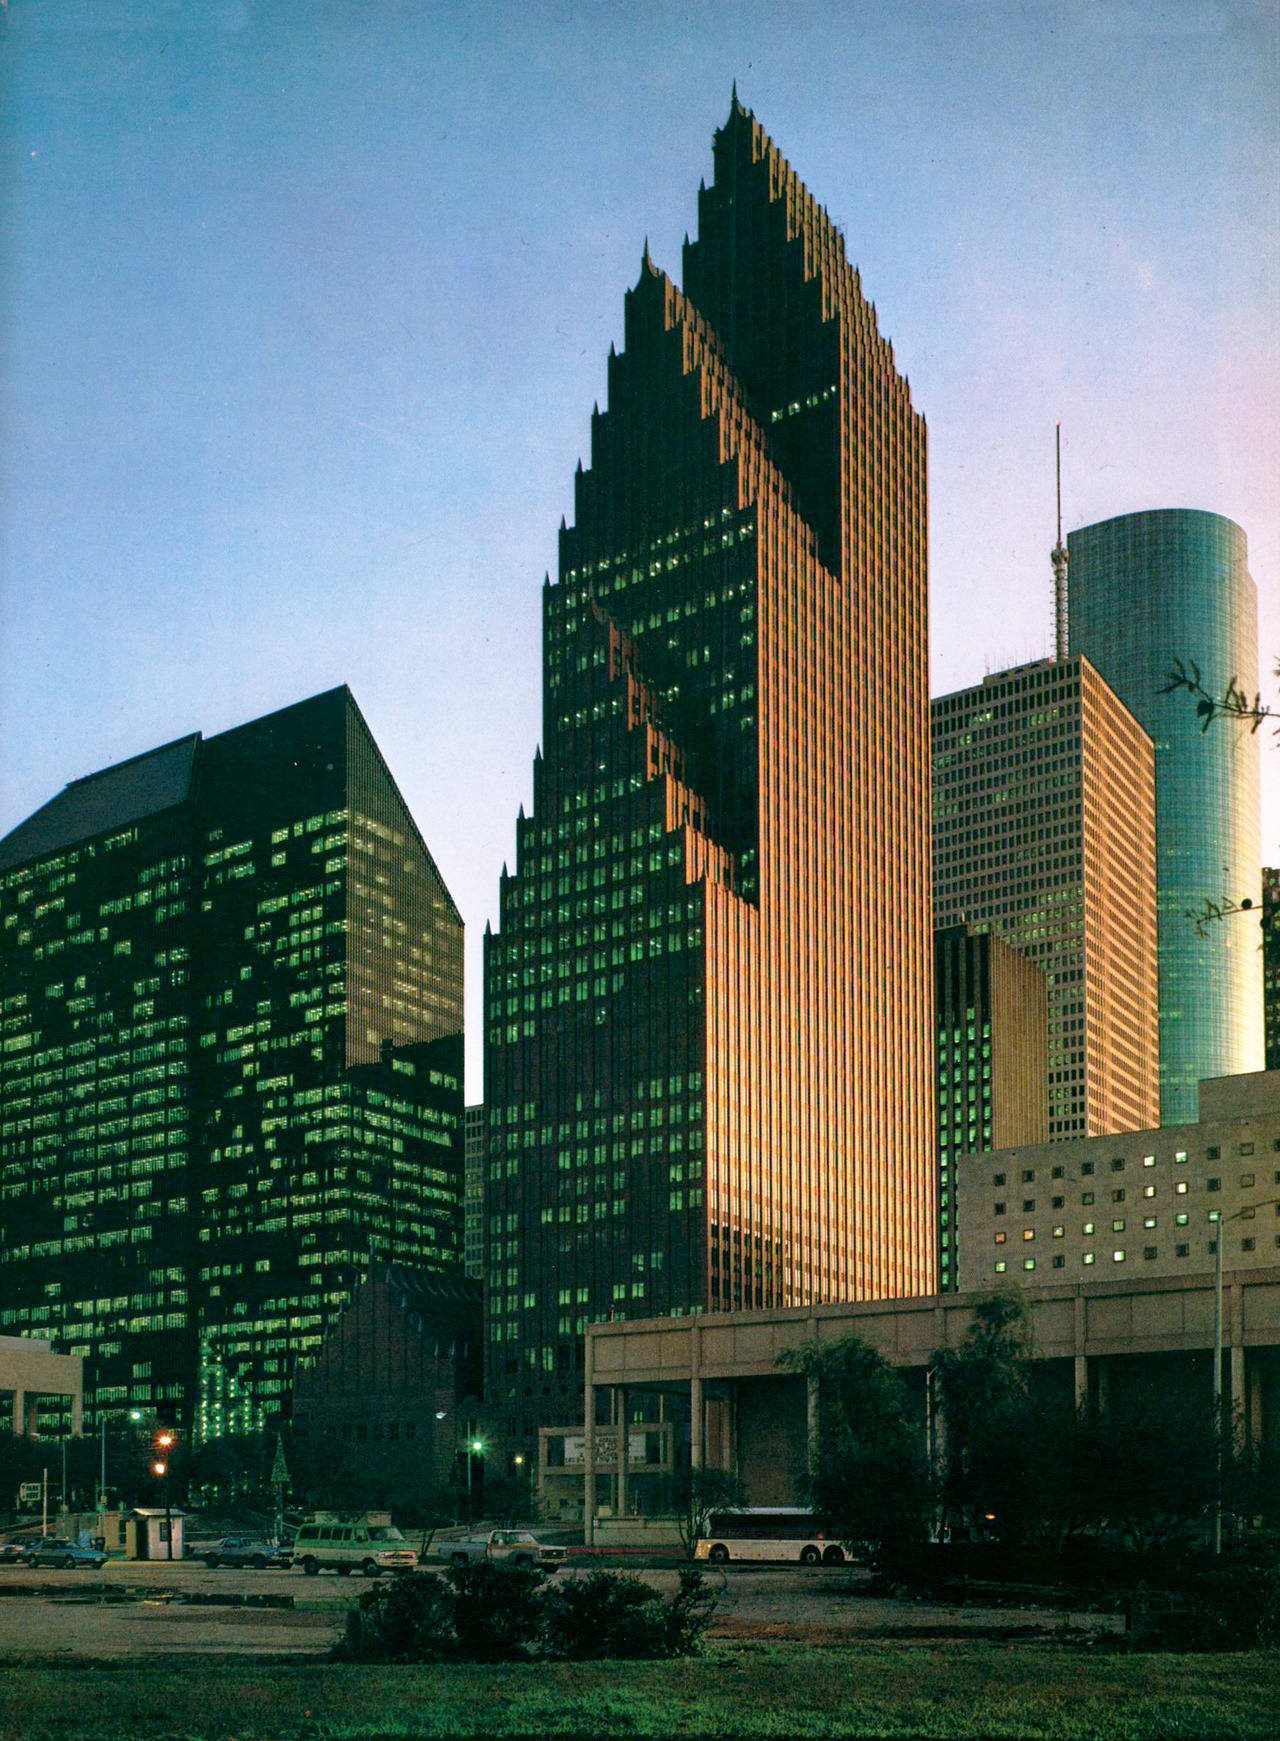 Two Philip Johnson towers developed by Hines sit side by side in downtown Houston. Trapezoidal tower on the left is Pennzoil Place, 1976. Gothic-inspired tower on the right is Republic Bank Center, 1987.